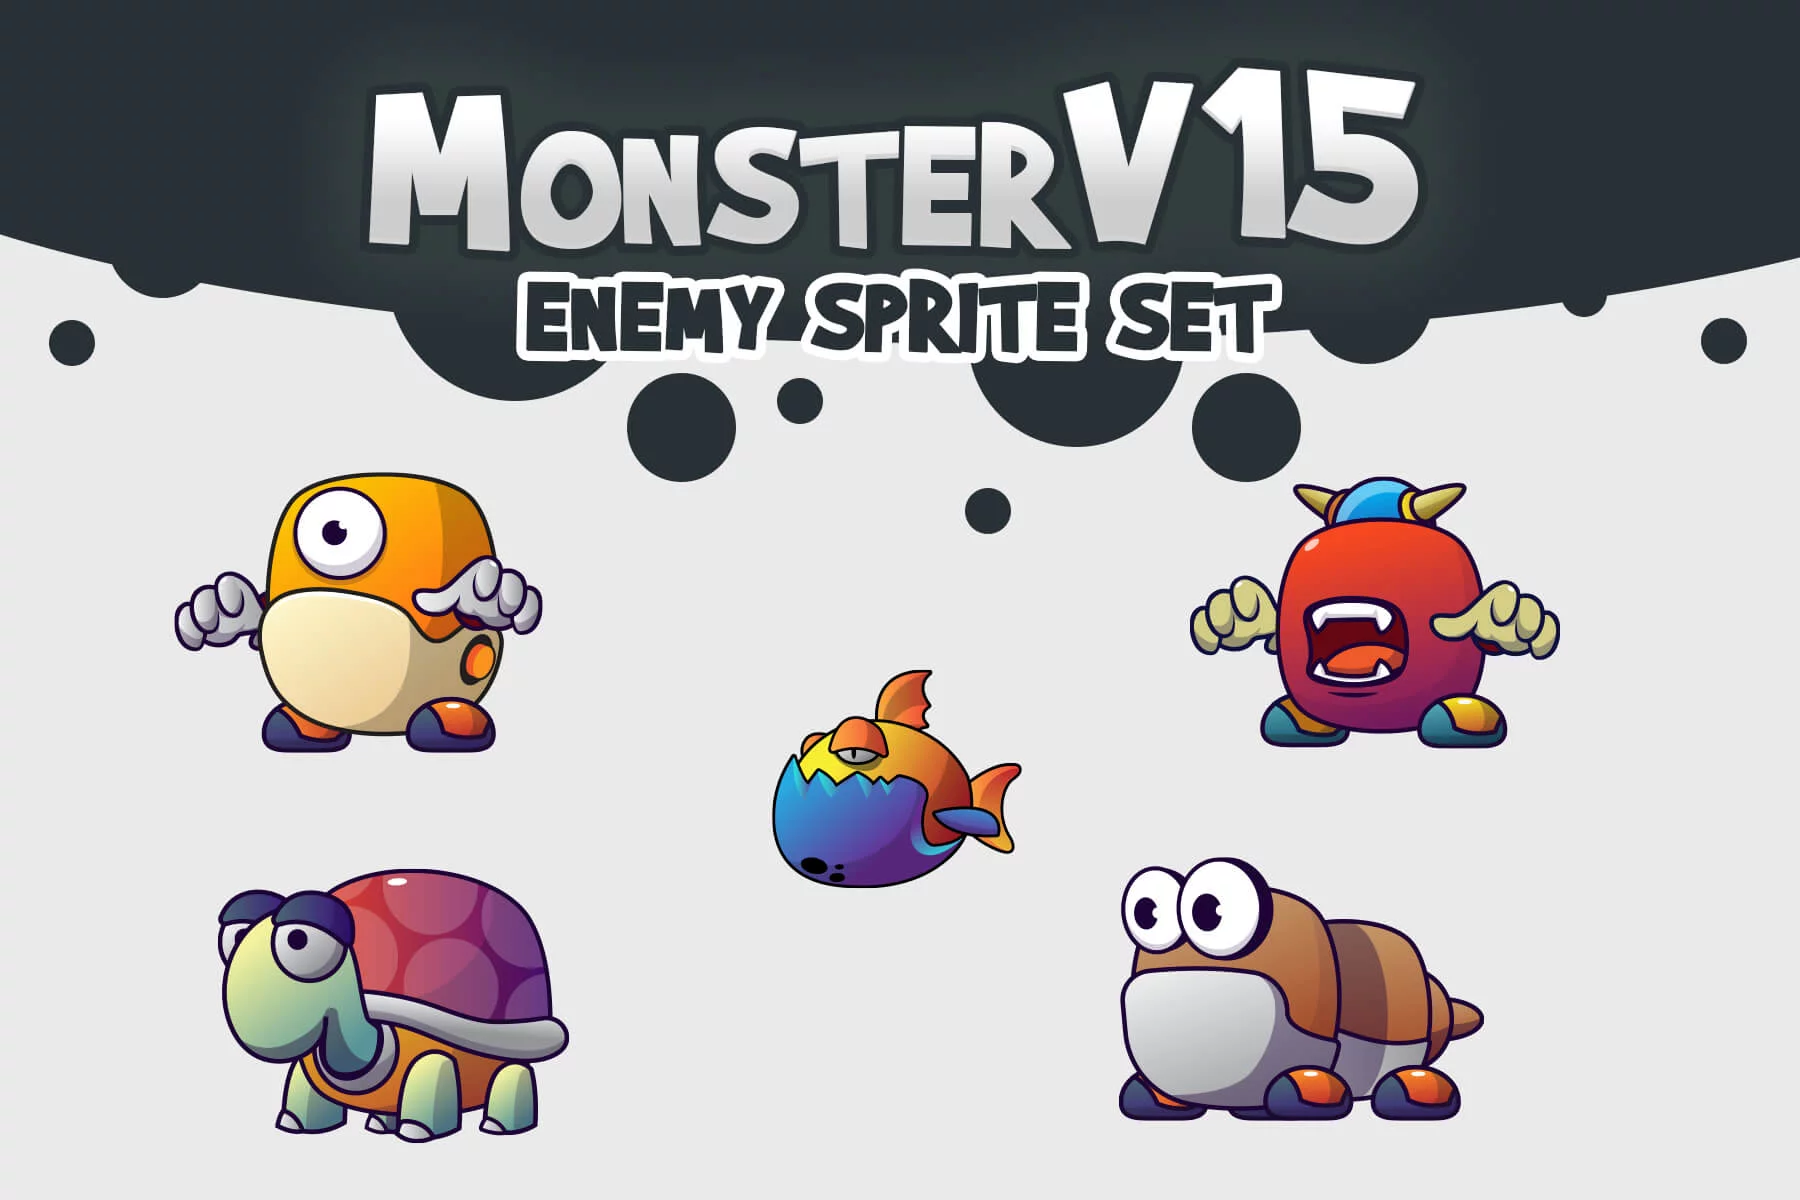 Cute characters, monsters, and game assets